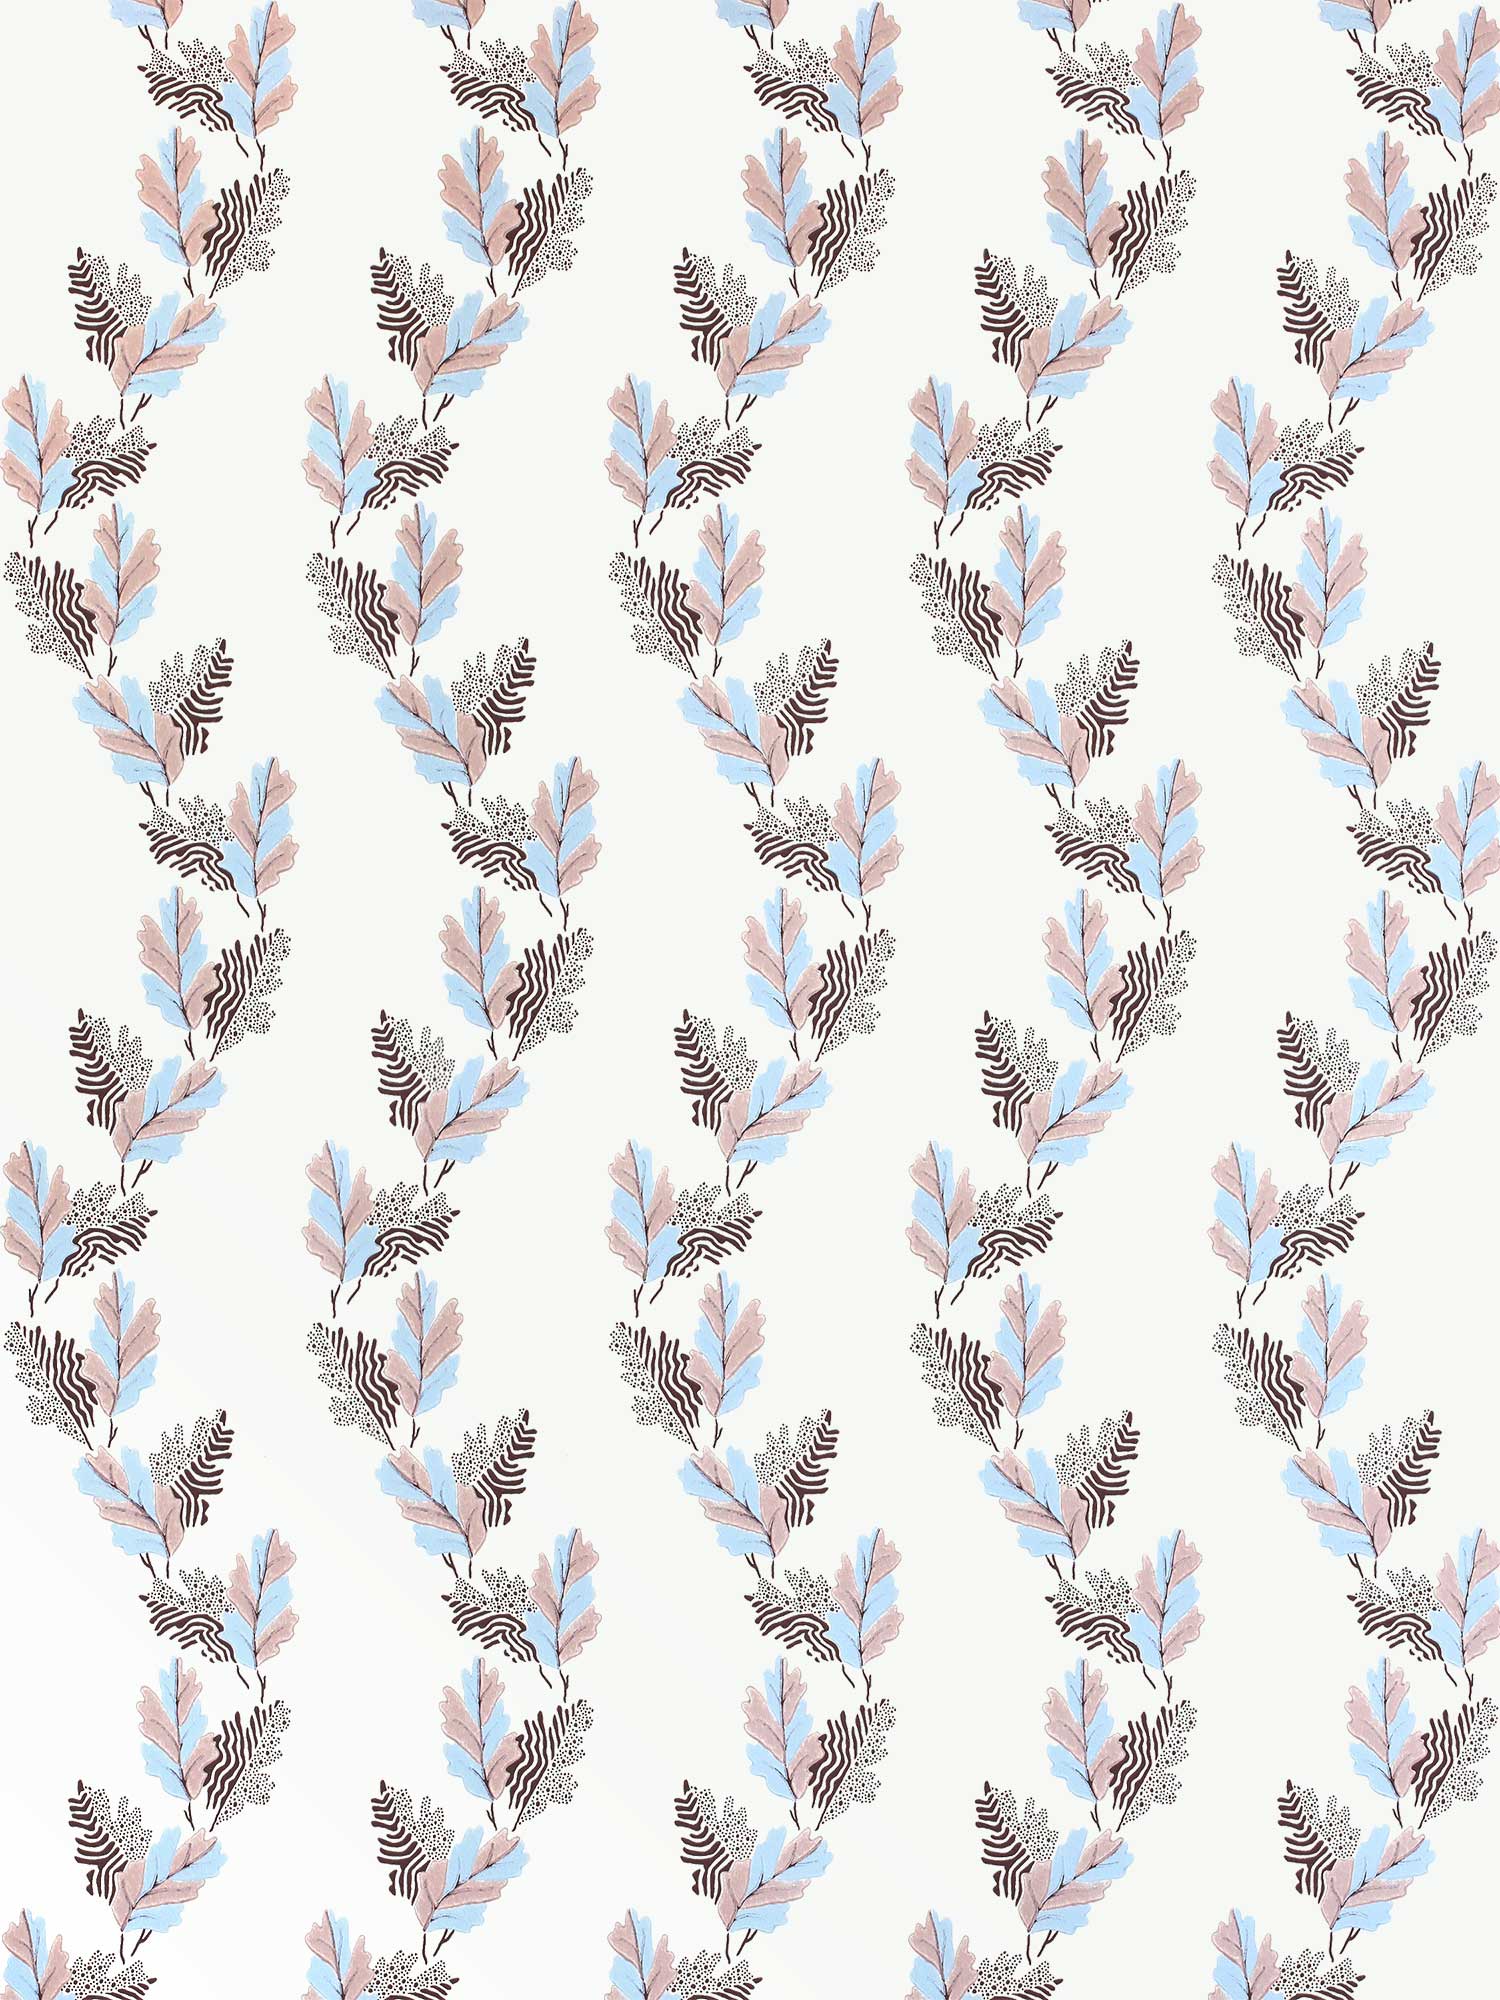 An archival design dating back to 1800, this wavy wallpaper displays falling oak leaves in pink and blue